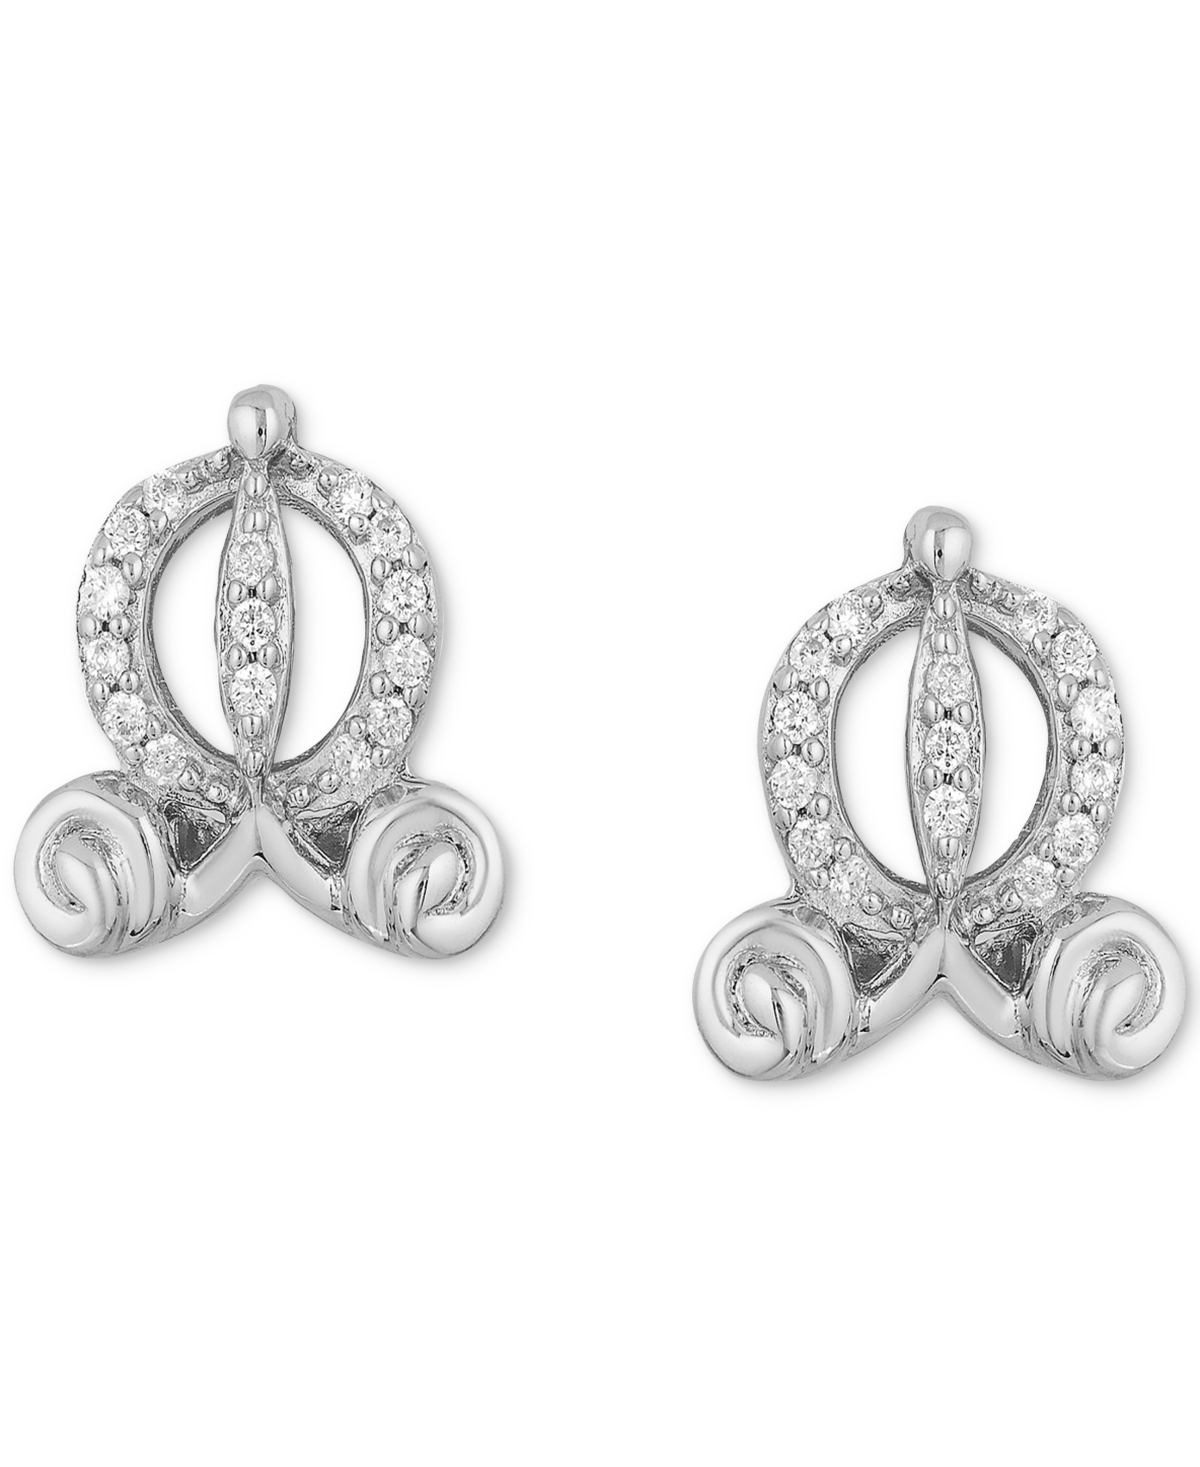 Diamond Accent Cinderella Carriage Stud Earrings in Sterling Silver - Sterling Silver